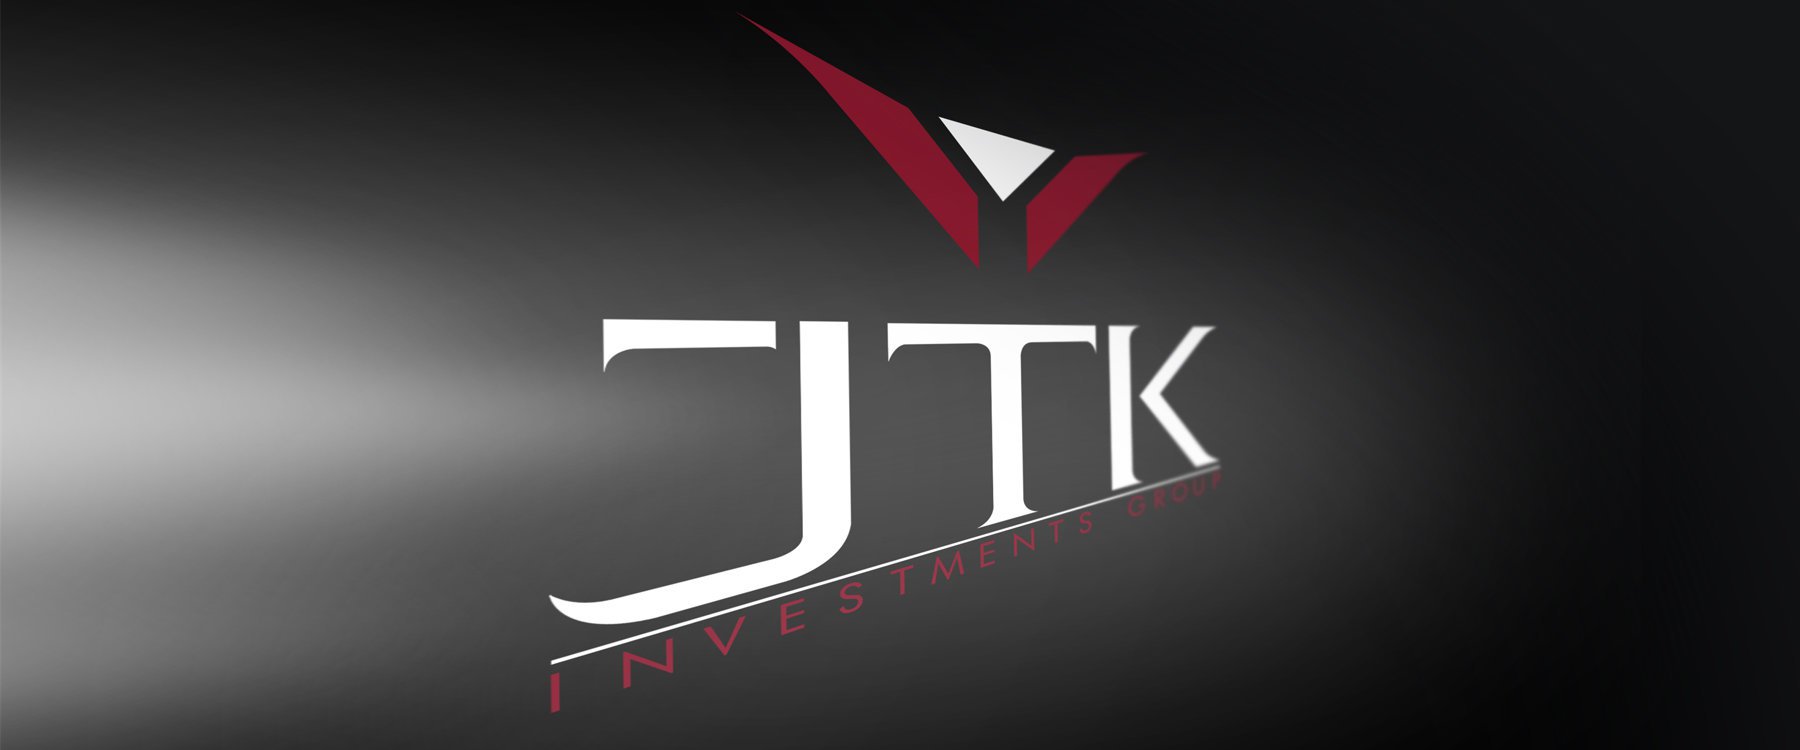 JTK Investments Group #4